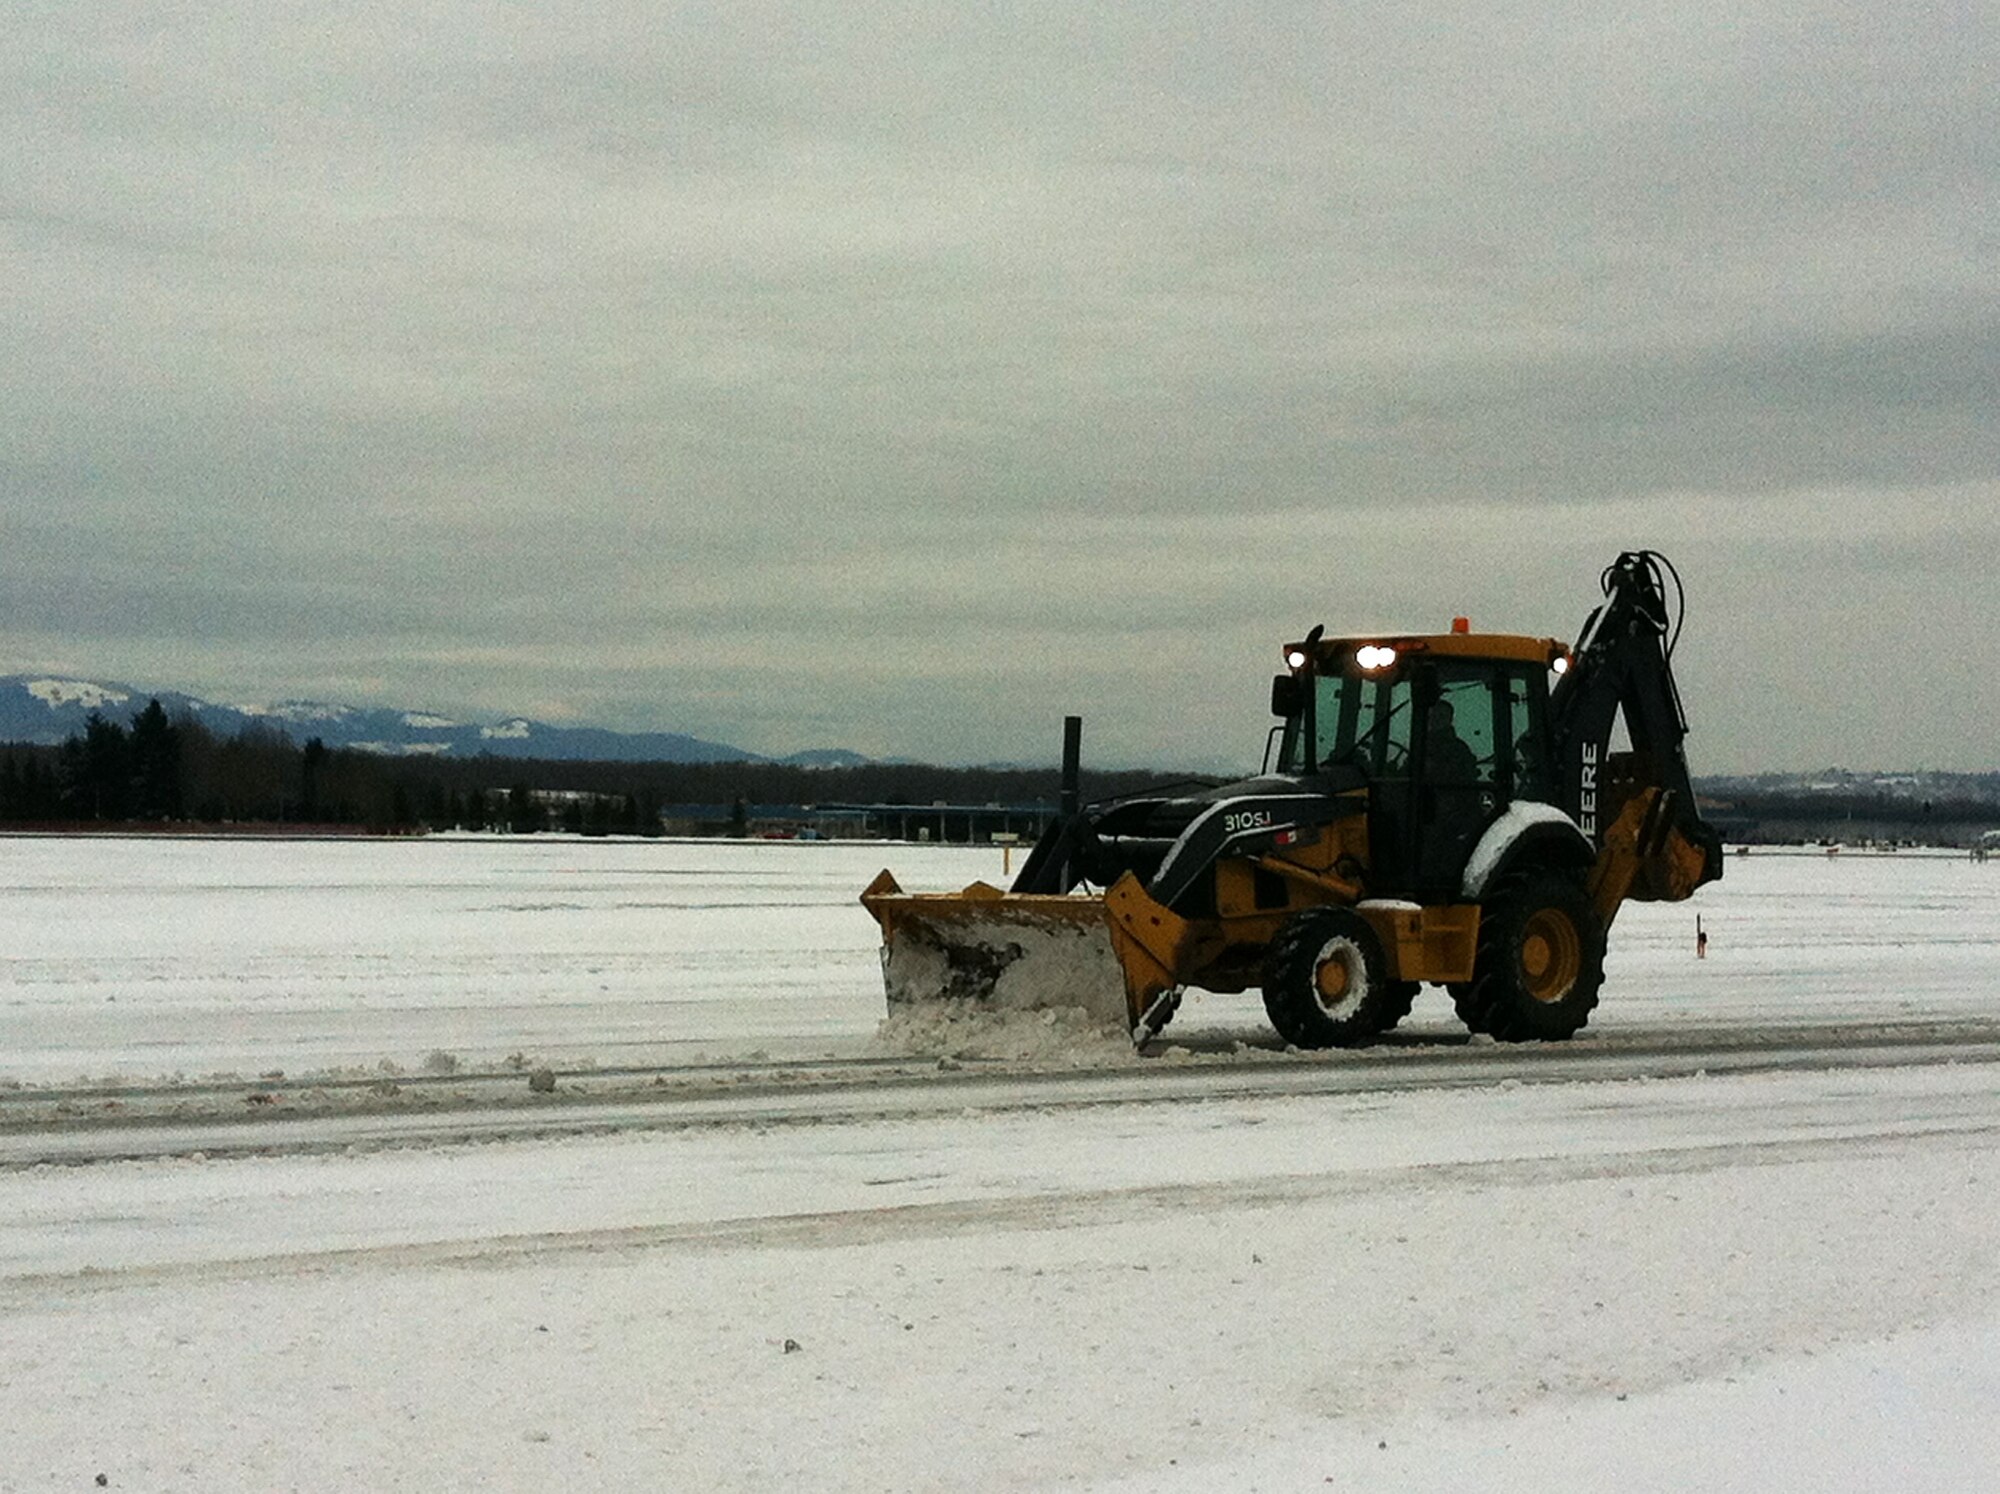 Airmen from the 142nd Fighter Wing Civil Engineer Squadron work to remove snow and ice from the Portland Air National Guard Base, Ore., Feb. 8, 2014.  The February Unit Training Assembly was cancelled, but a small group from the CES worked over the weekend to keep the base running and the alert mission operational during the winter storm that hit the Pacific Northwest region. (photo courtesy of Lt. Col. Jason Lay, 142nd Fighter Wing Civil Engineers)